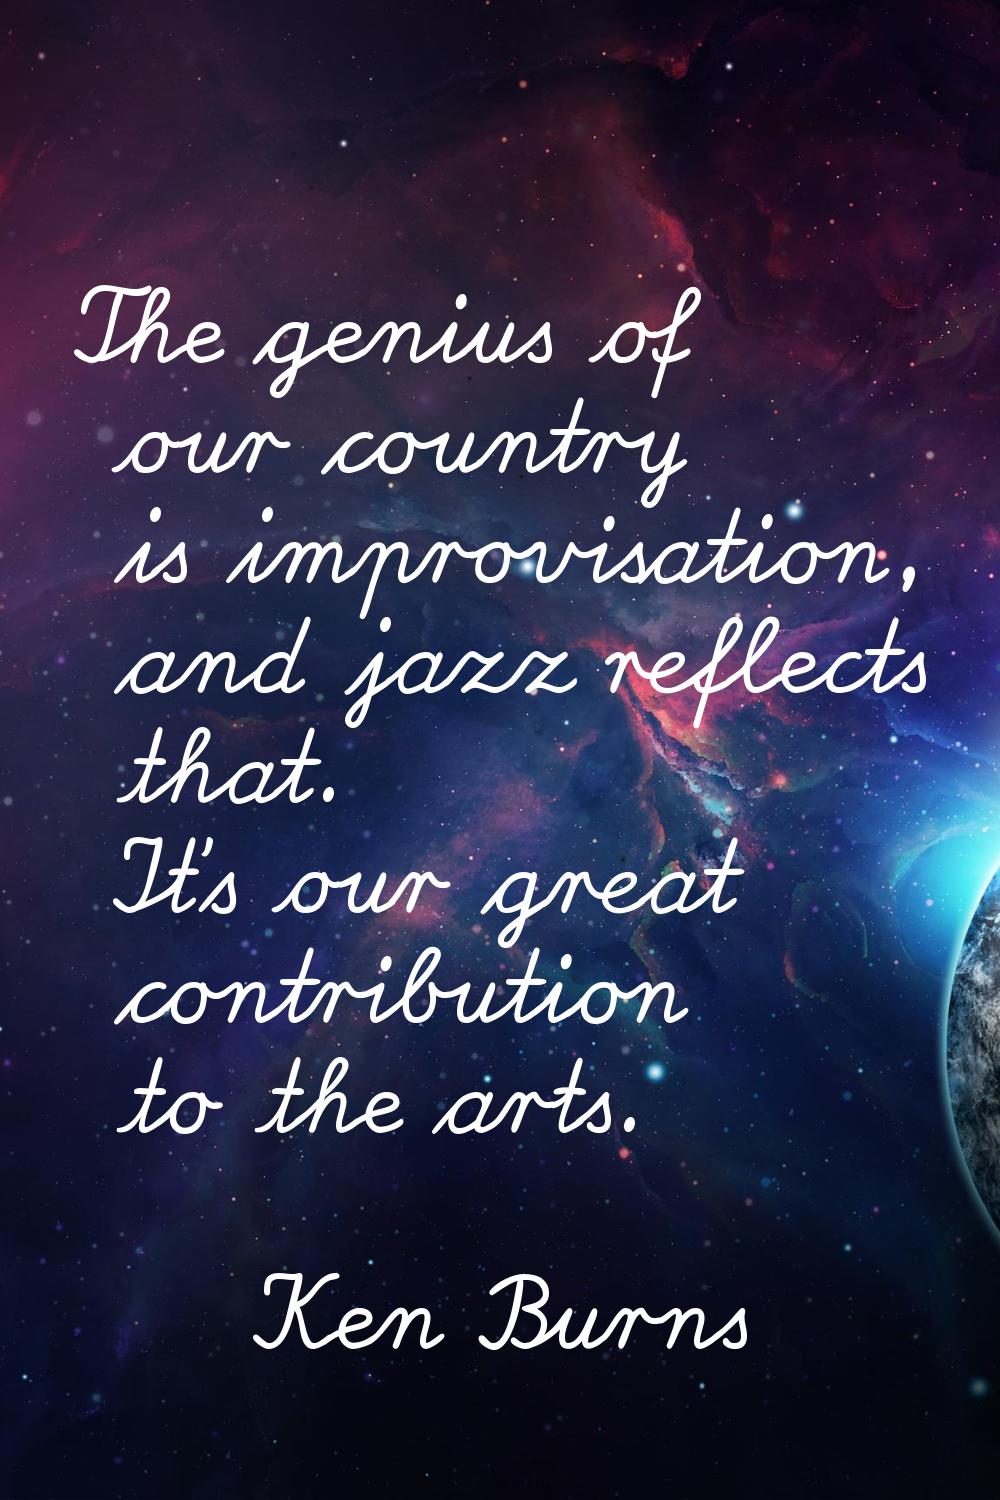 The genius of our country is improvisation, and jazz reflects that. It's our great contribution to 